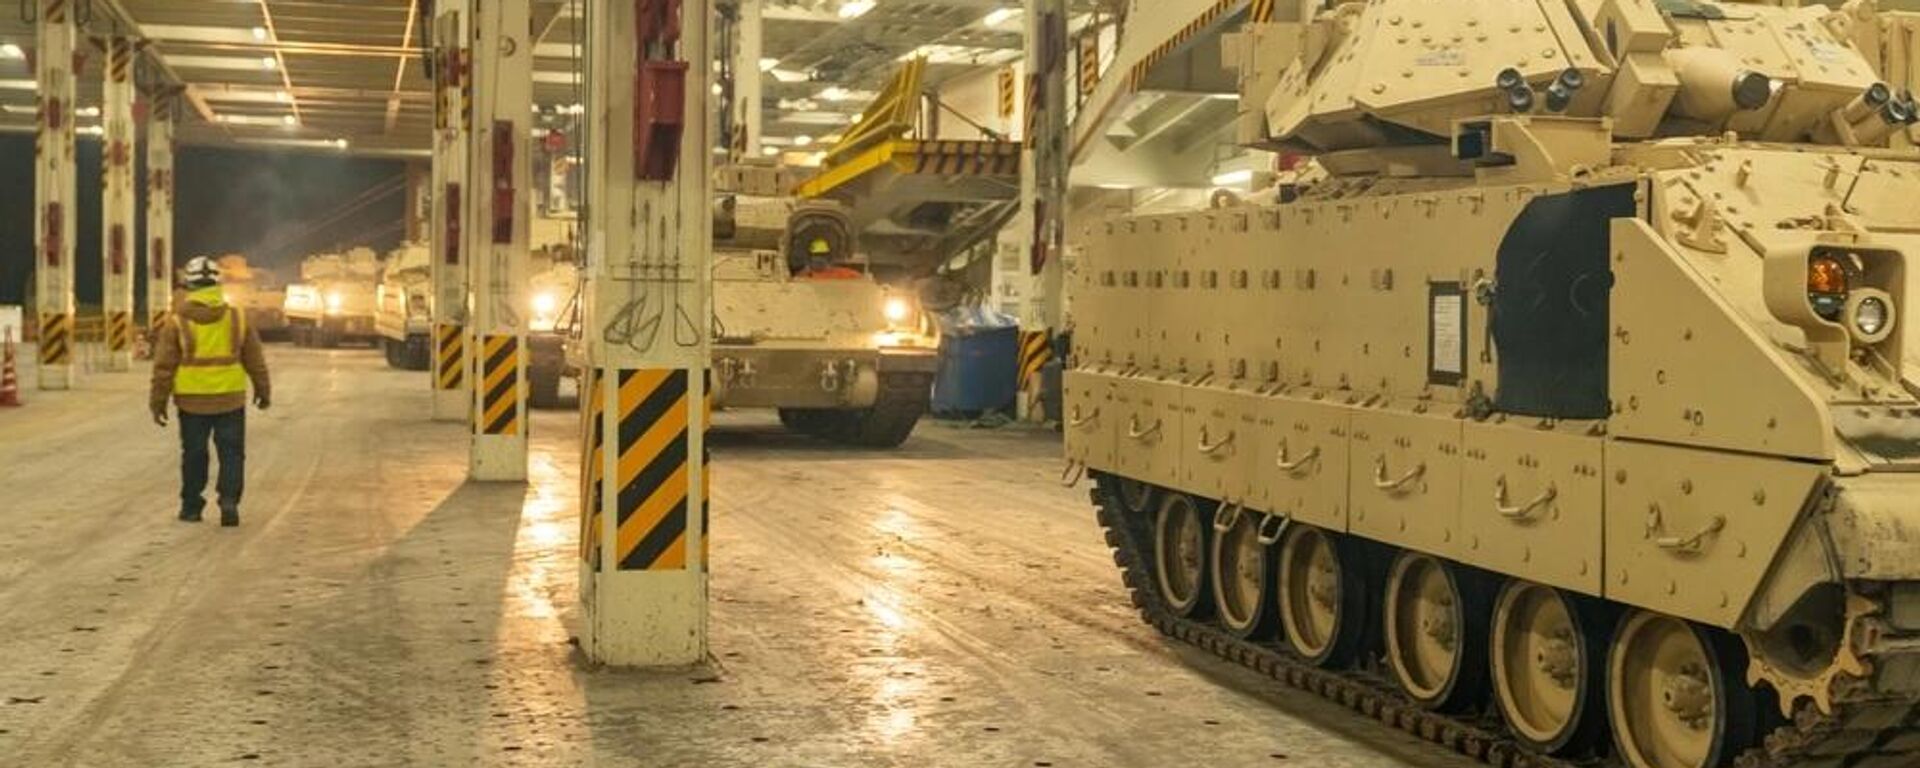 A convoy of Bradley Fighting Vehicles load onto the ARC Integrity Jan. 25, 2023, at the Transportation Core Dock in North Charleston, South Carolina. More than 60 Bradleys were shipped by U.S. Transportation Command as part of the U.S. military aid package to Ukraine. - Sputnik International, 1920, 19.03.2024